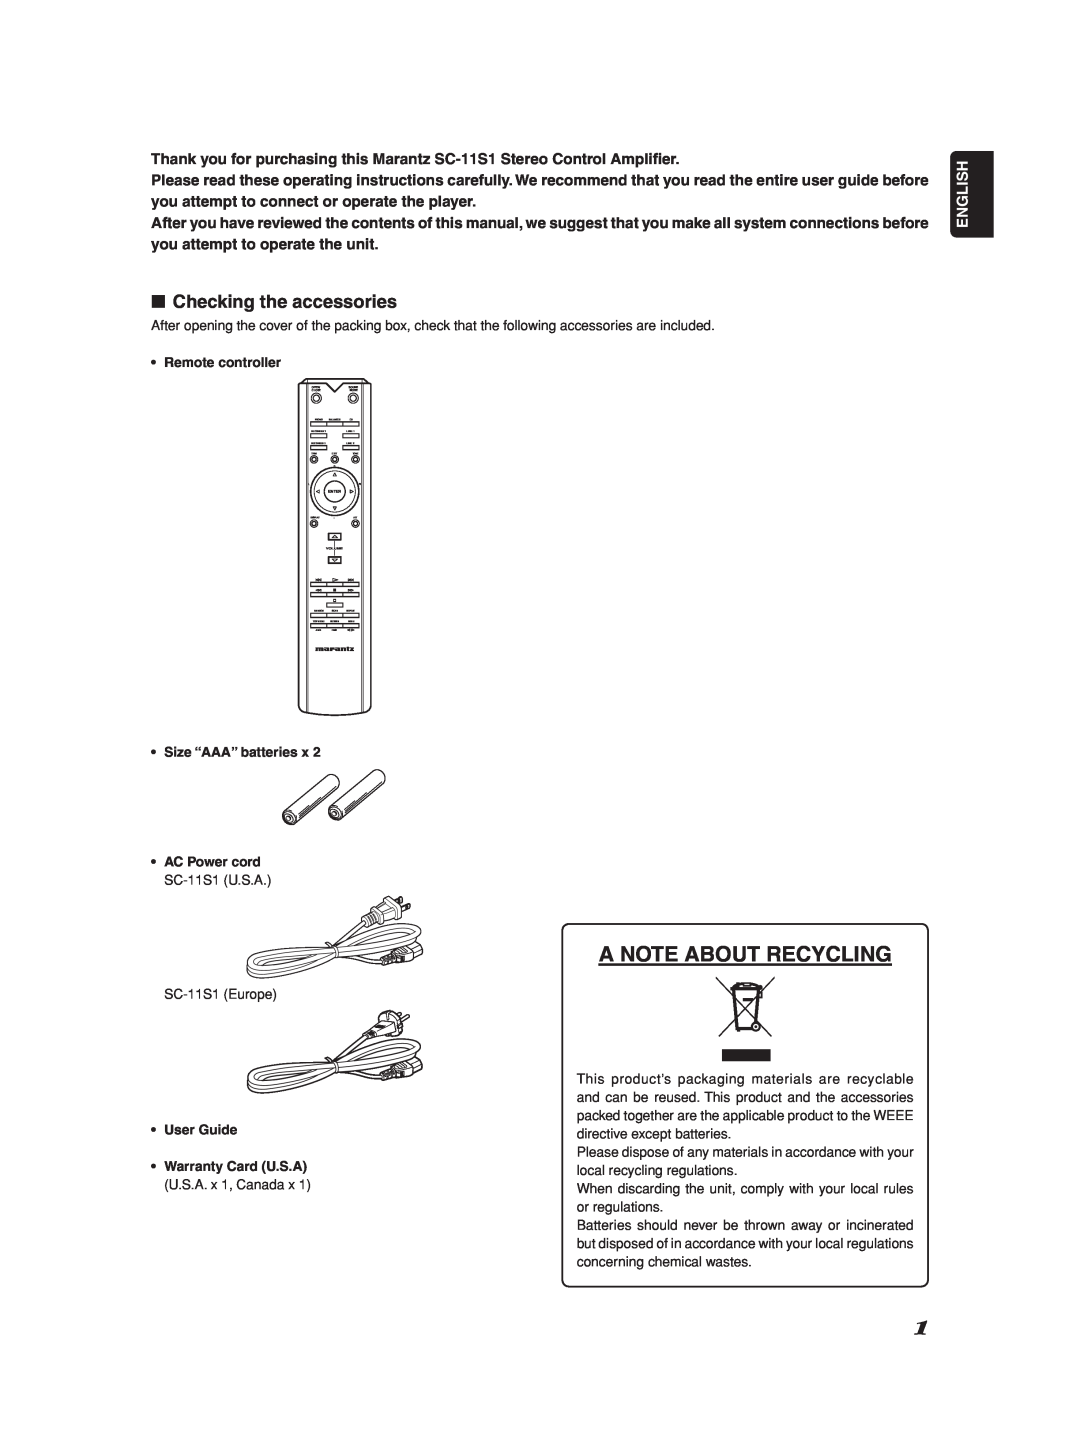 Marantz Model SC-11S1 manual A Note About Recycling, 7Checking the accessories, English 